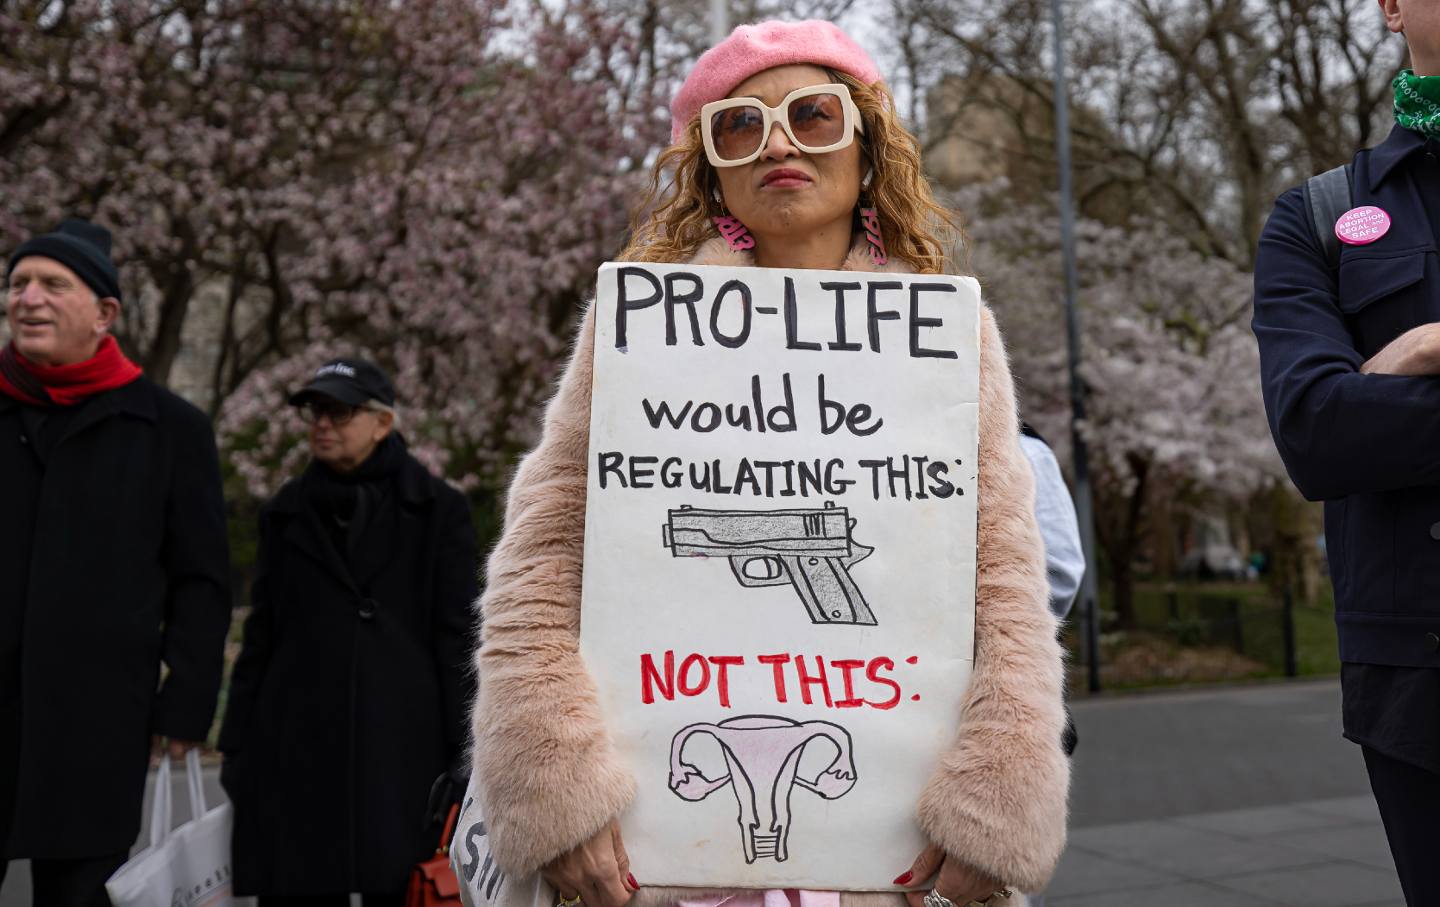 A pro-choice activist during a protest in New York City